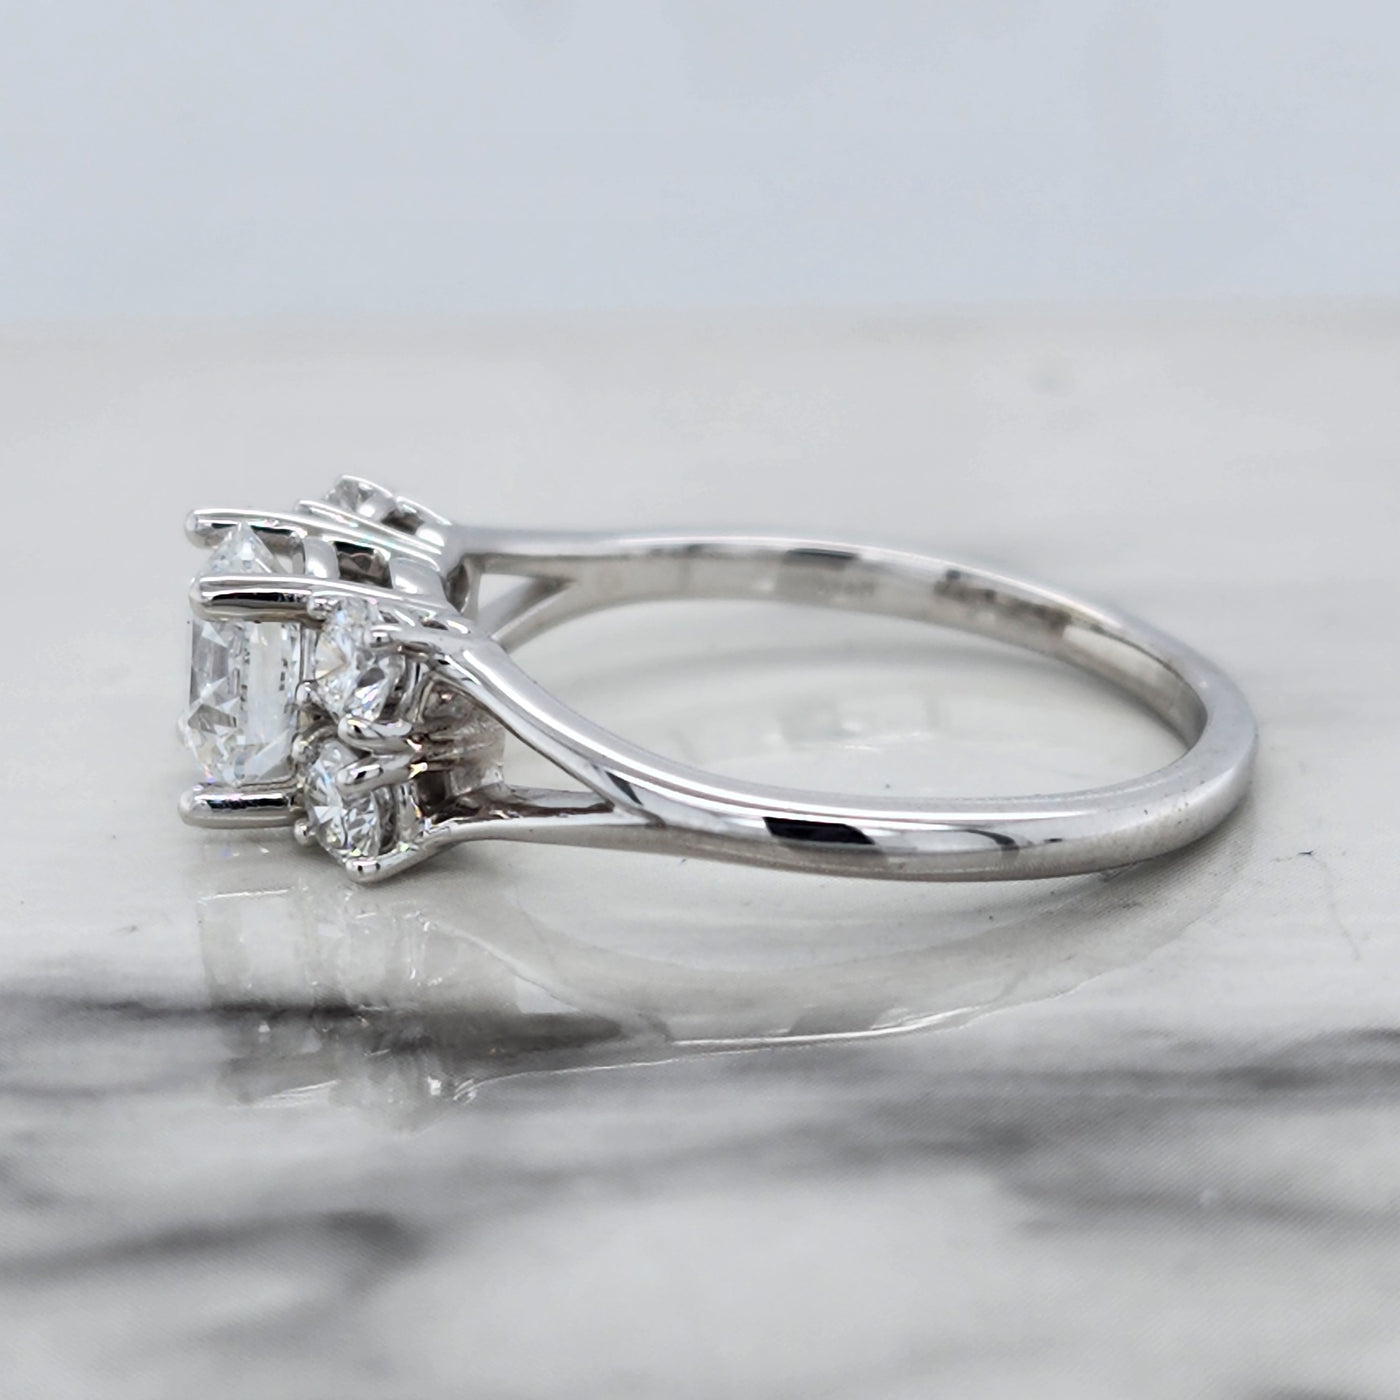 5 Stone White Gold Engagement Ring With Round Center Diamond and Round Accents